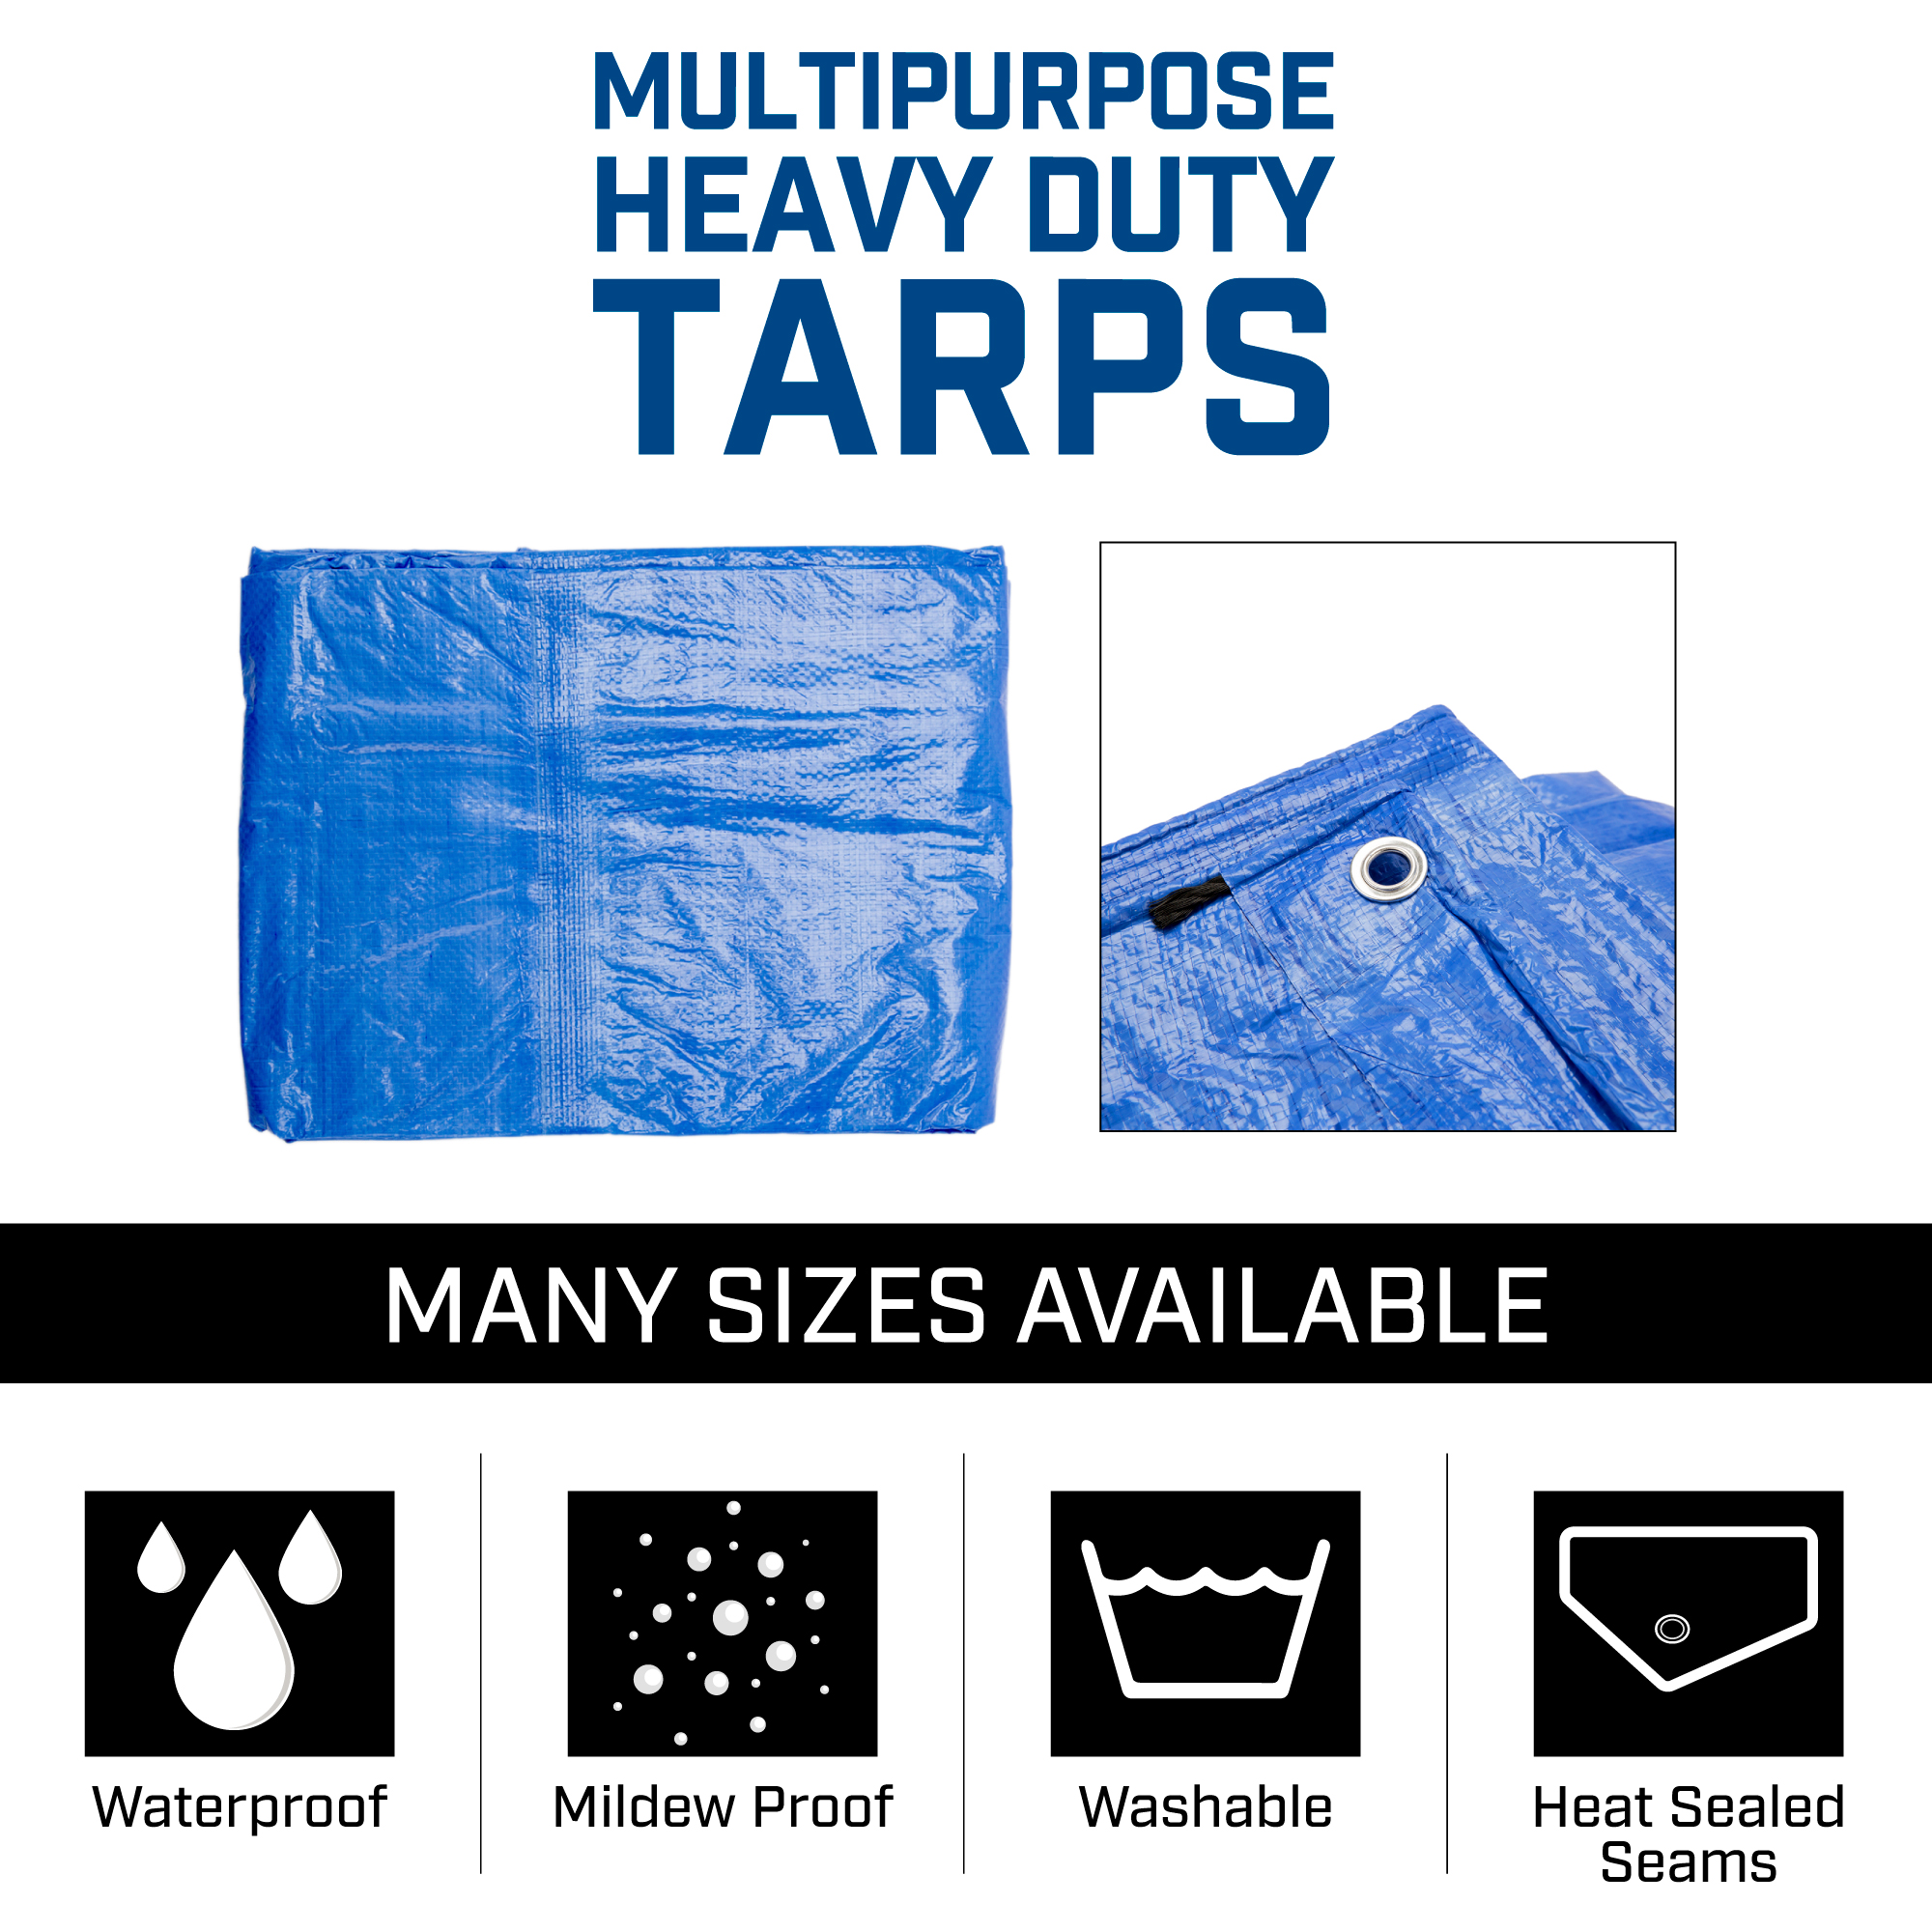 B-Air Grizzly Tarps 15 x 15 Feet Blue Multi Purpose Waterproof Poly Tarp Cover 5 Mil Thick 8 x 8 Weave - image 2 of 4